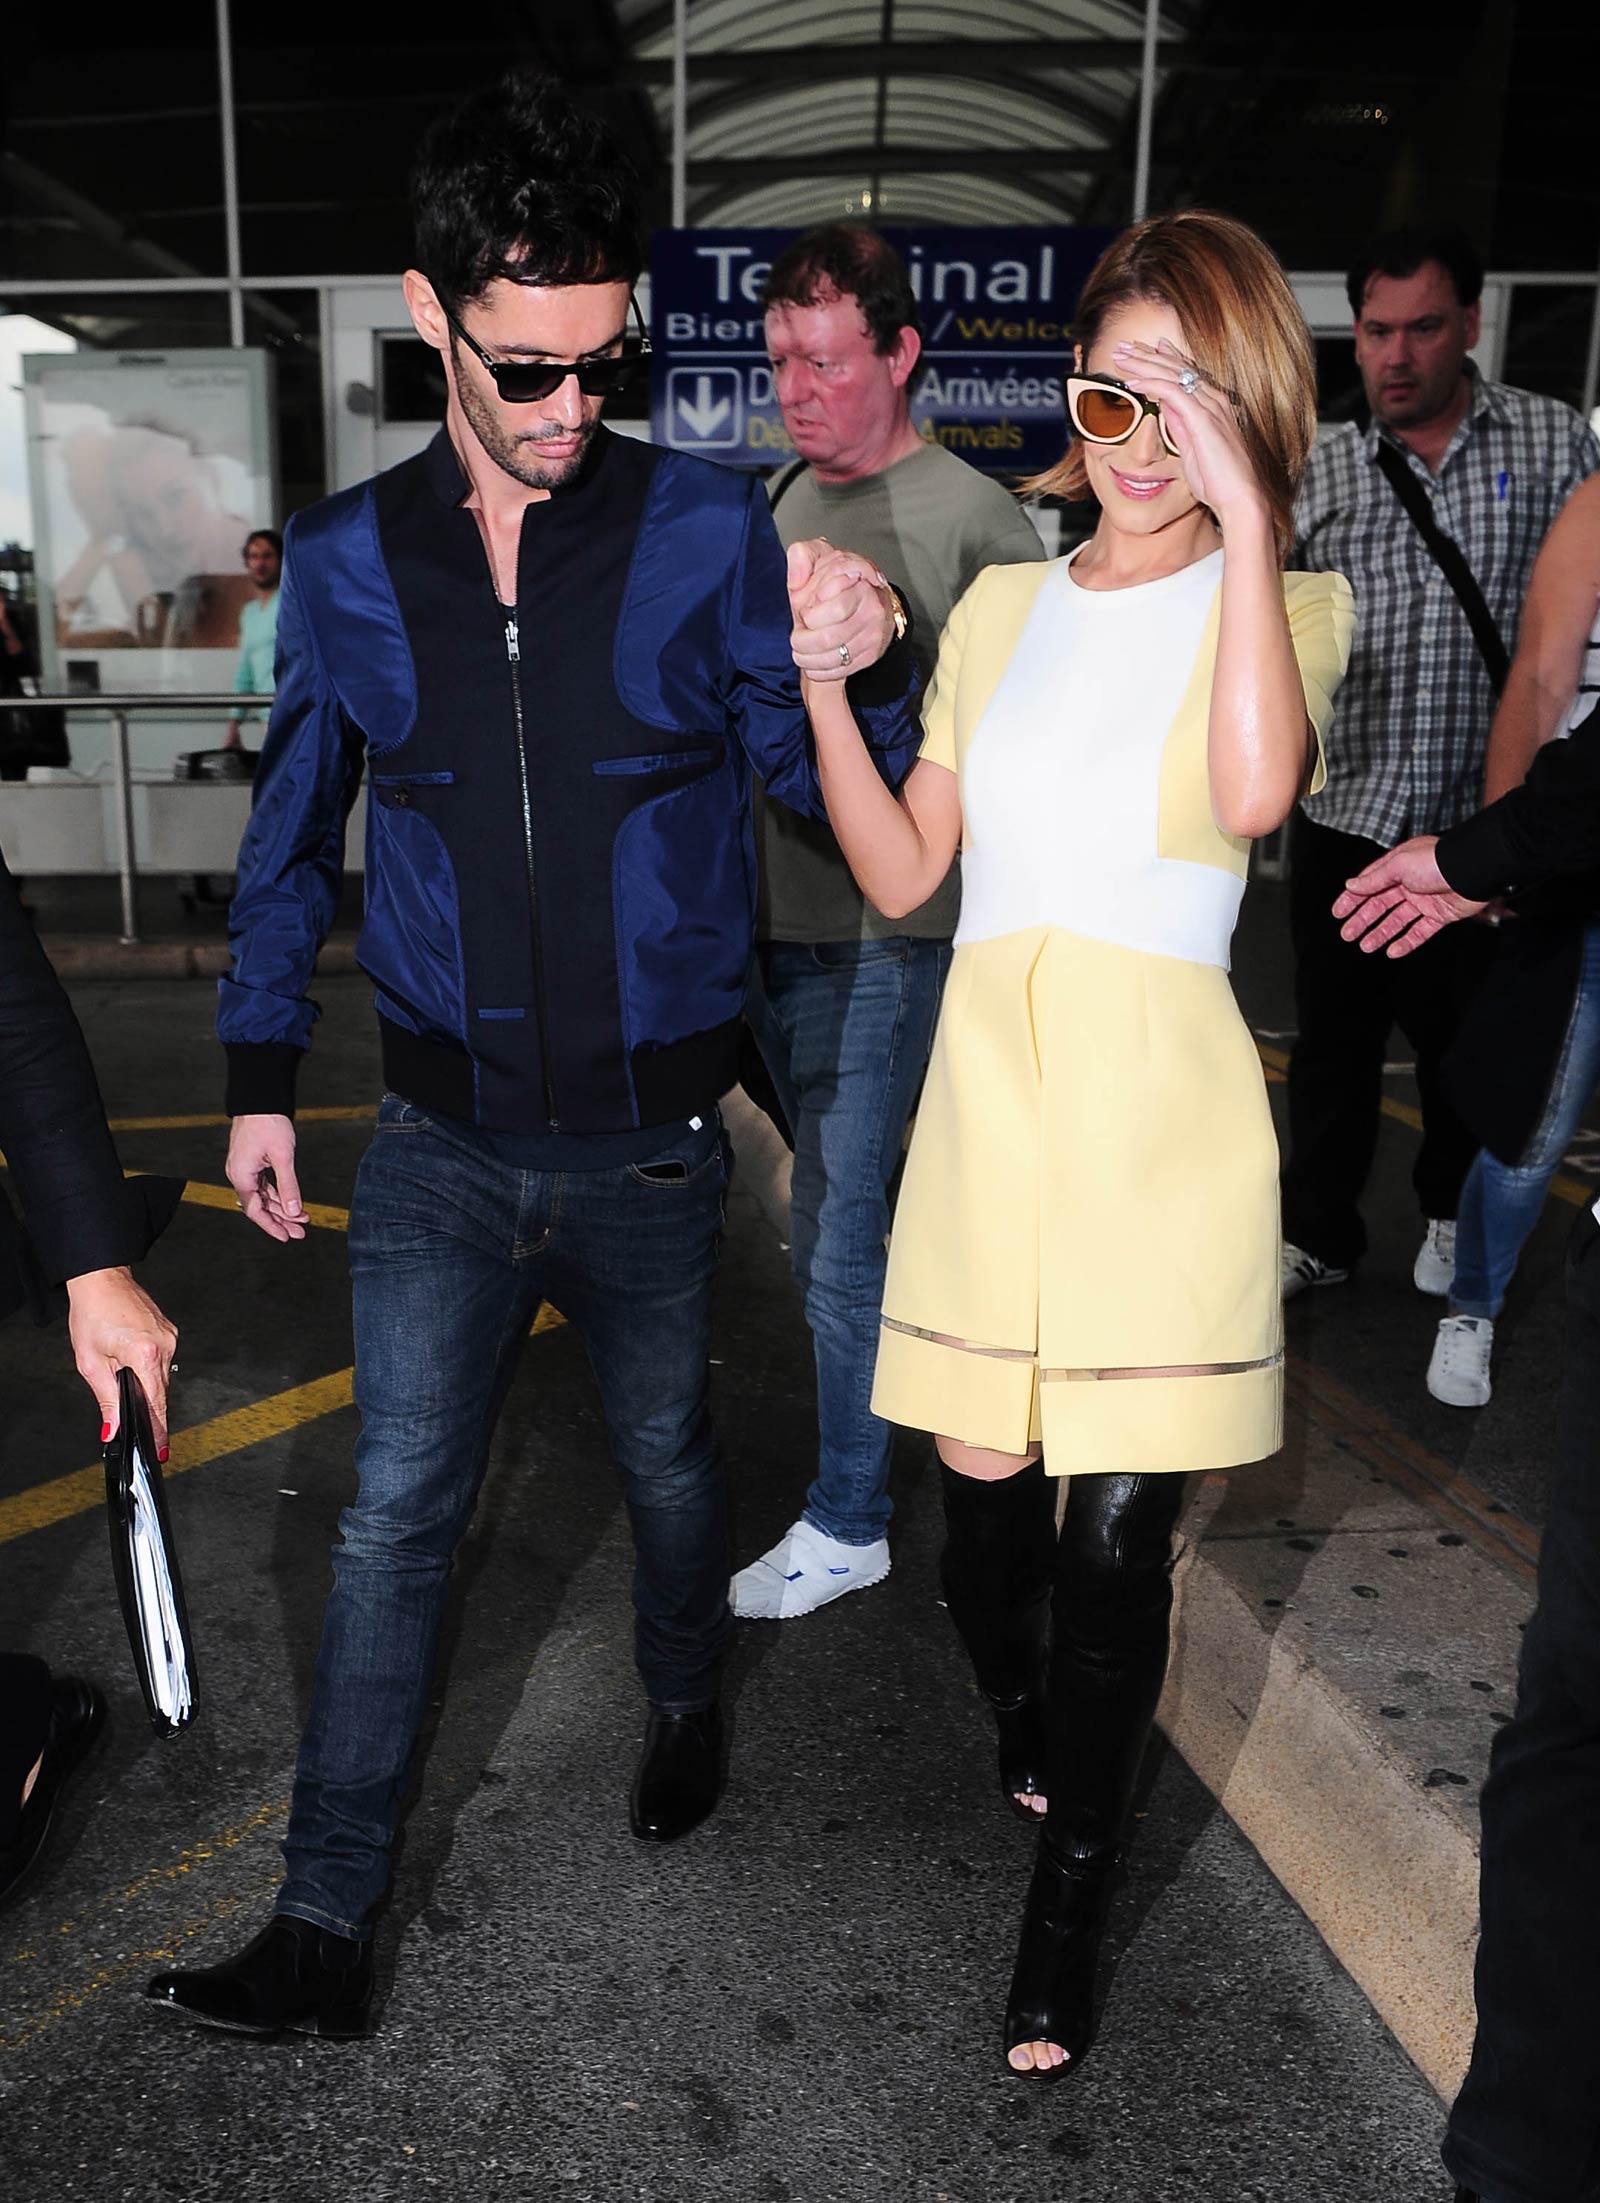 Cheryl Cole at Nice Cote d’Azur Airport in France